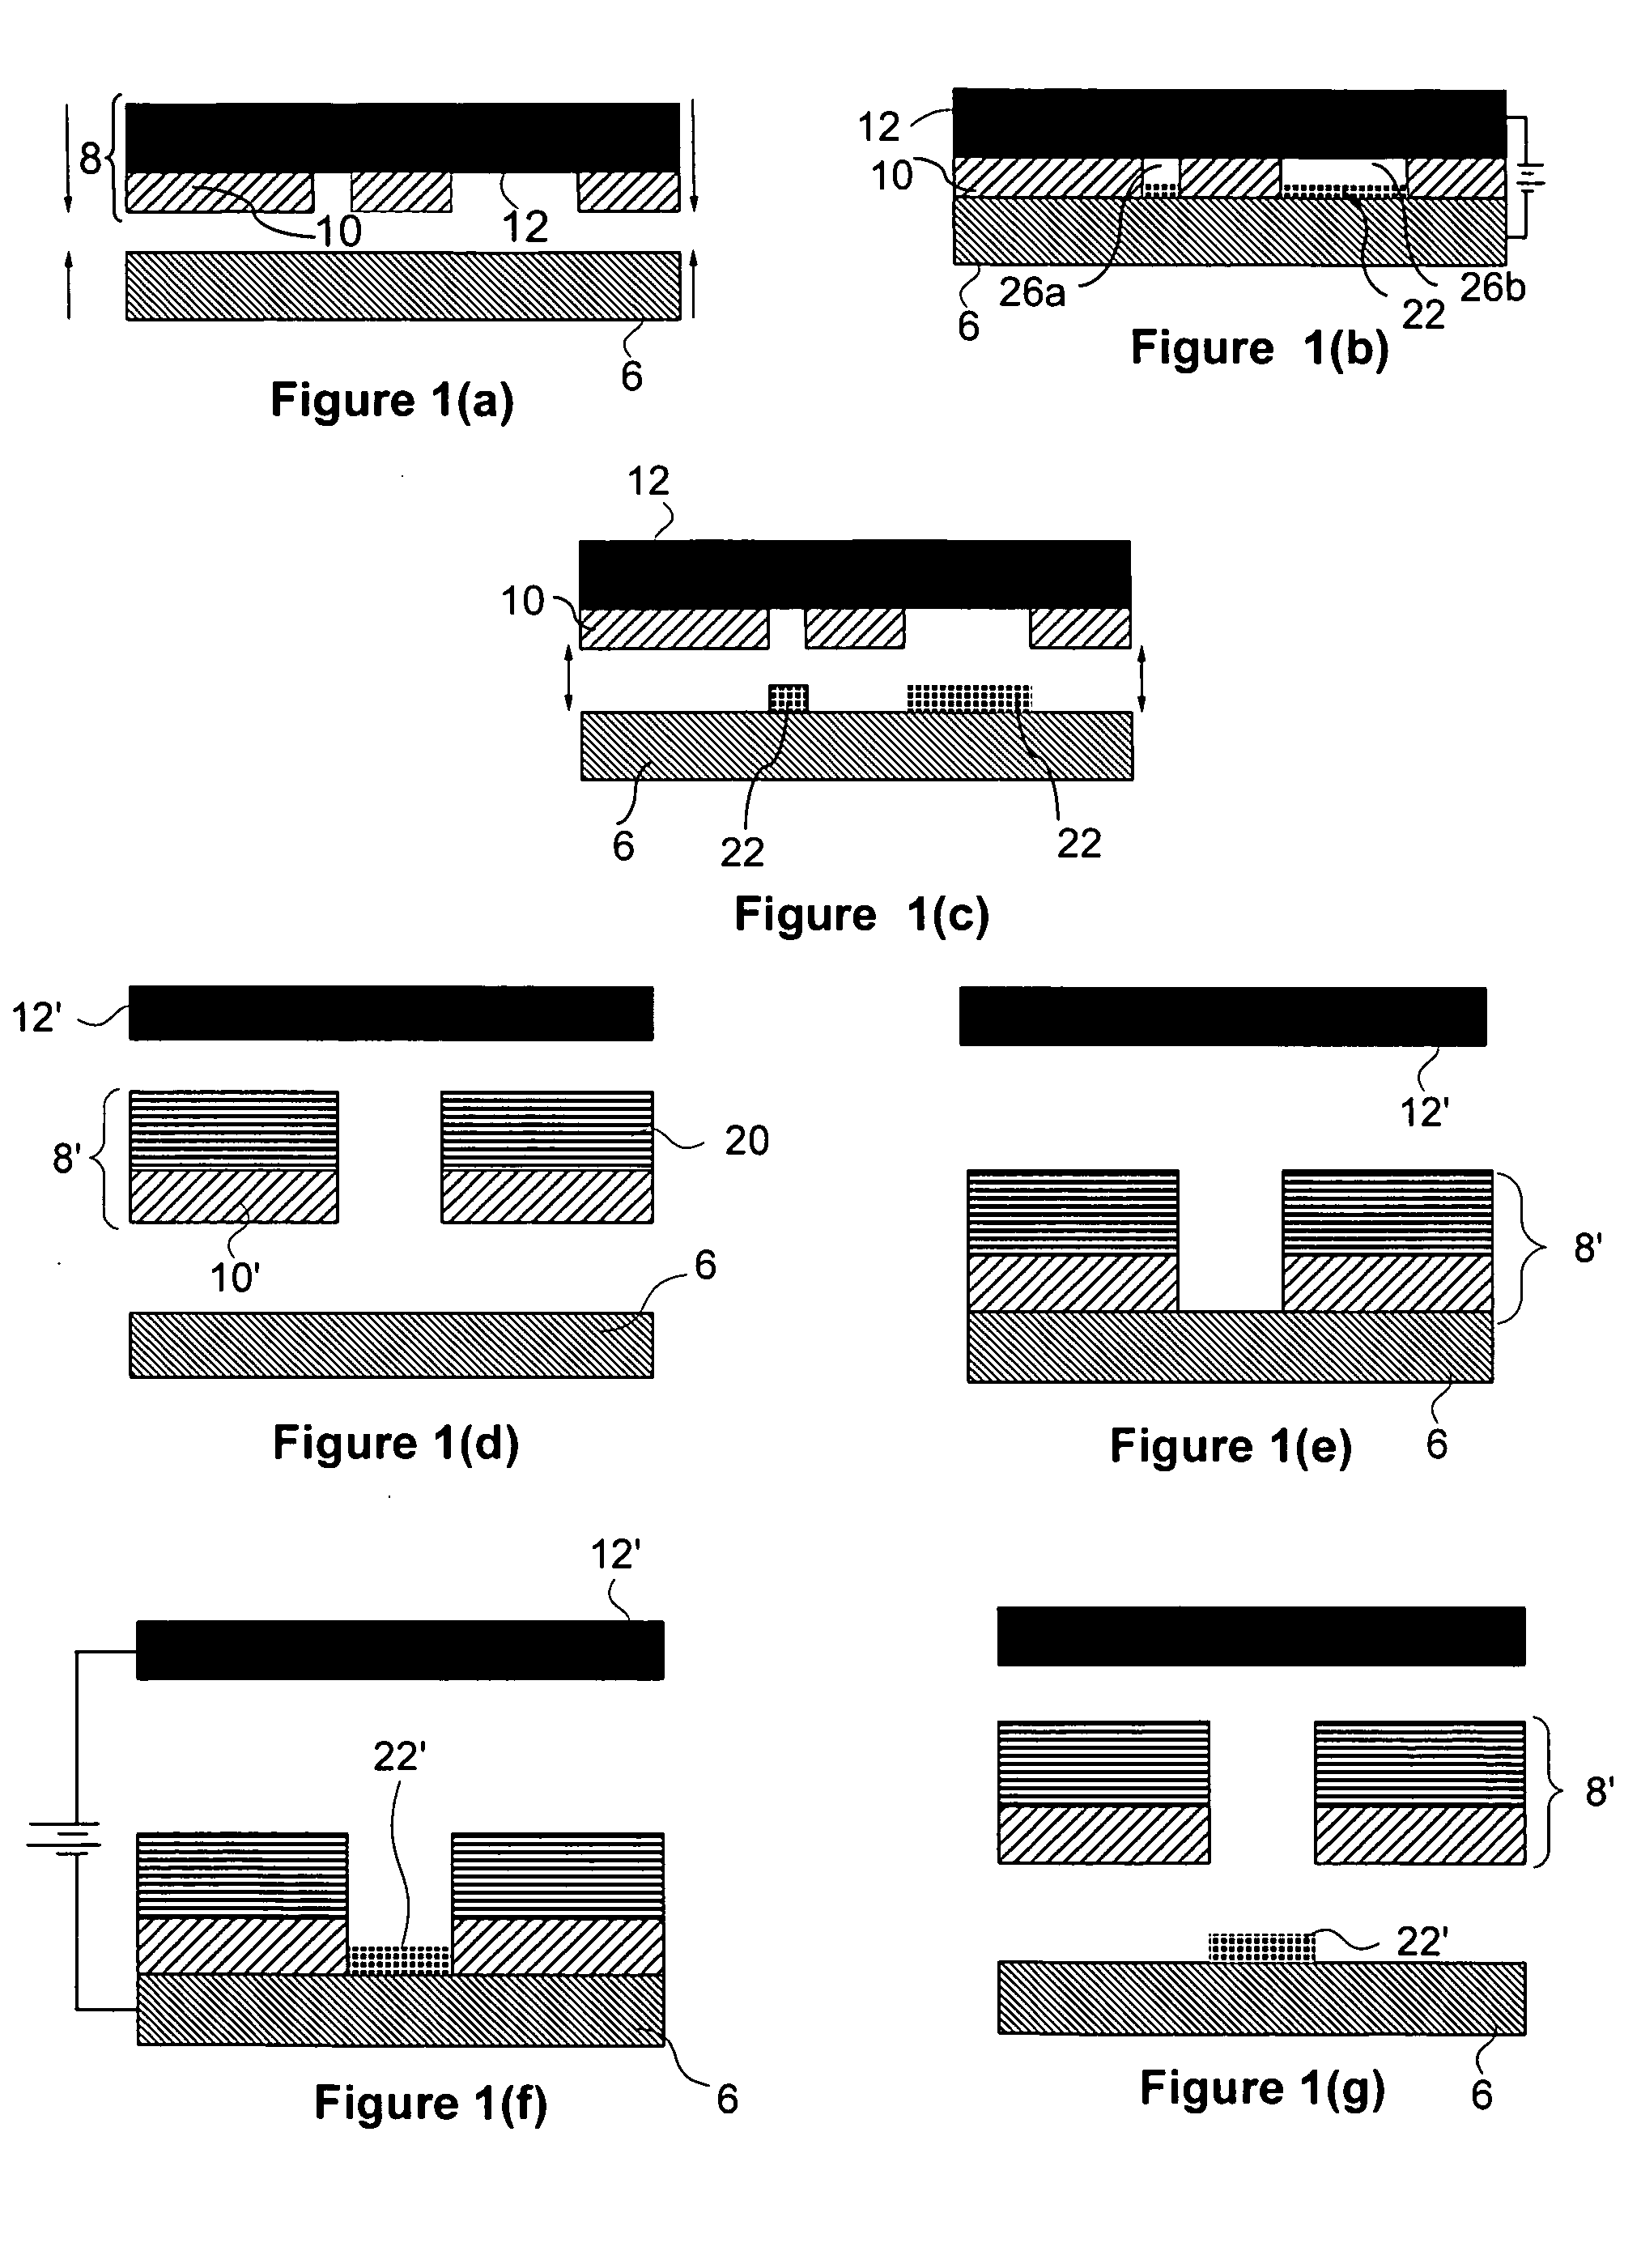 Multi-step release method for electrochemically fabricated structures